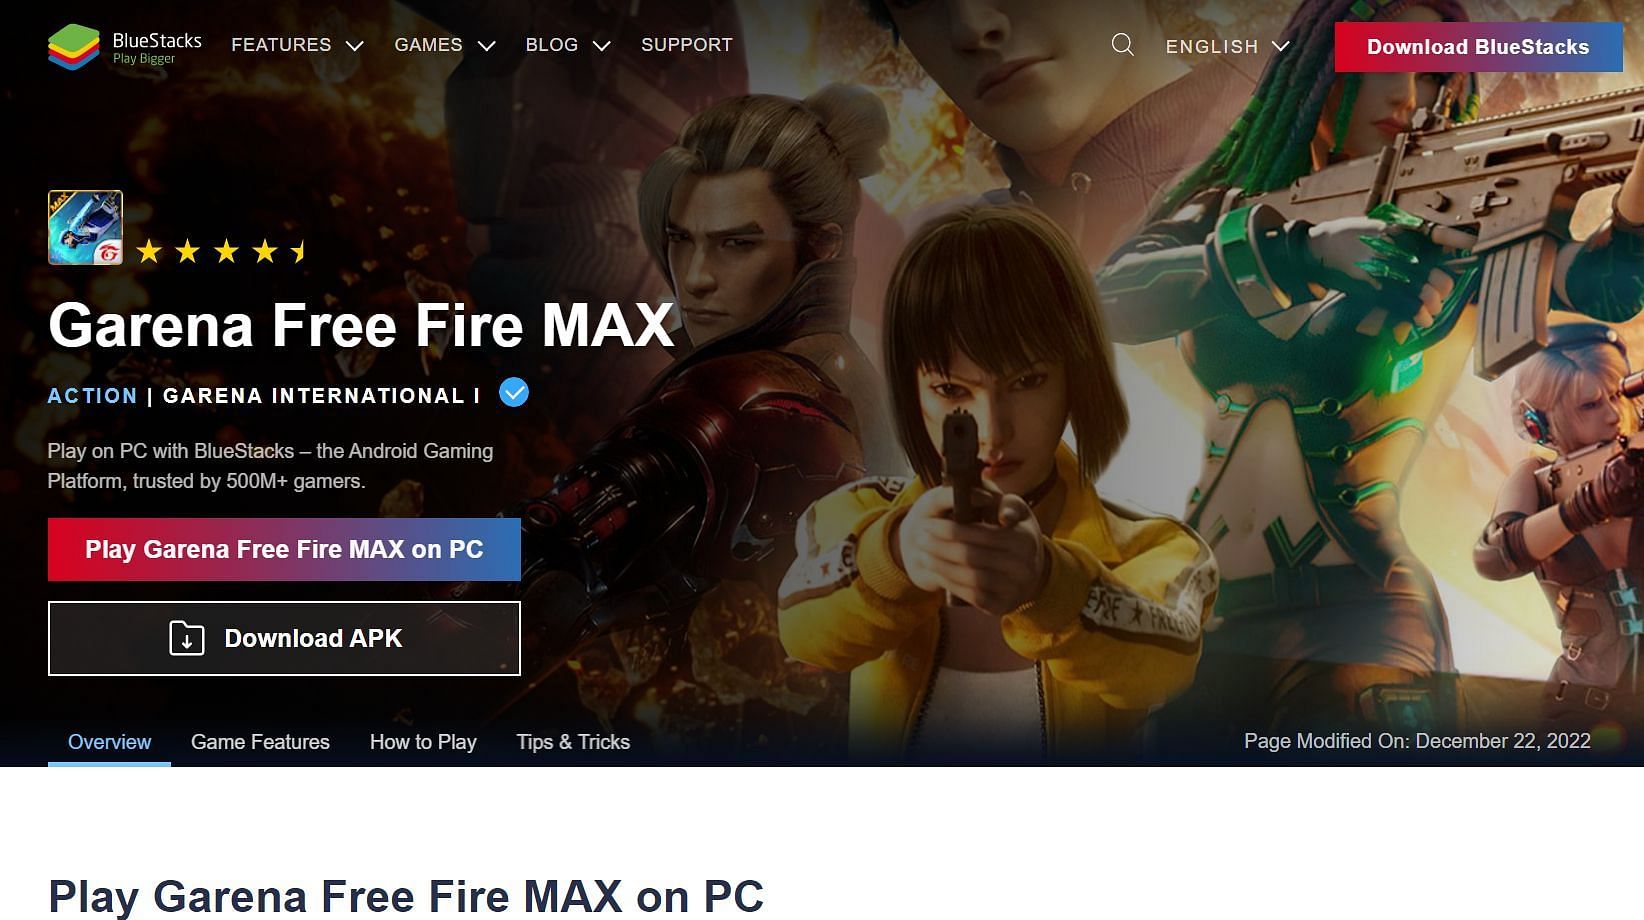 Play Garena Free Fire MAX on PC With BlueStacks